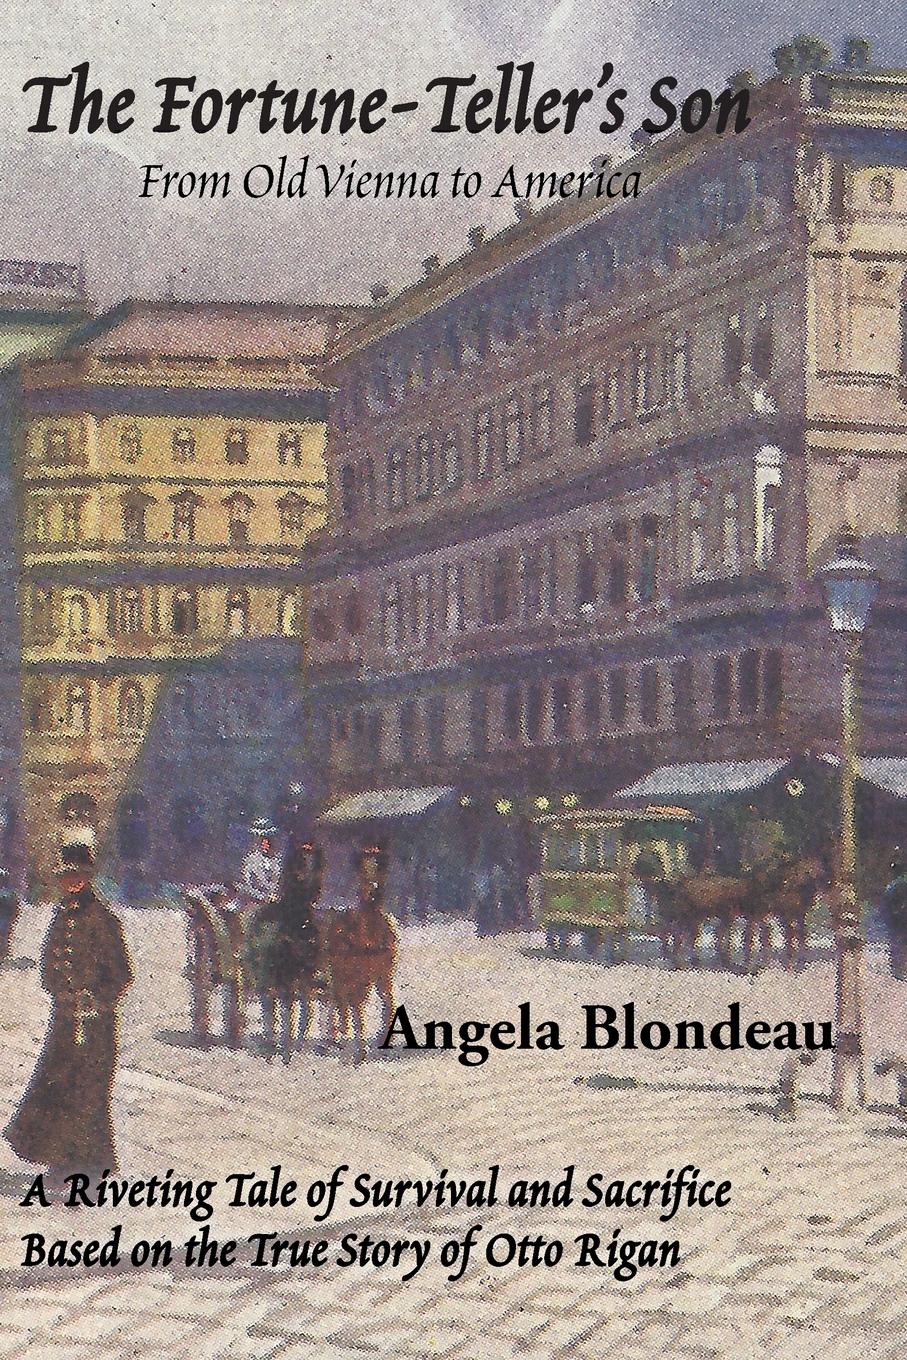 Angela Blondeau The Fortune-Teller.s Son. A Riveting Tale of Survival and Sacrifice from Old Vienna to America Based on the True Story of Otto Rigan